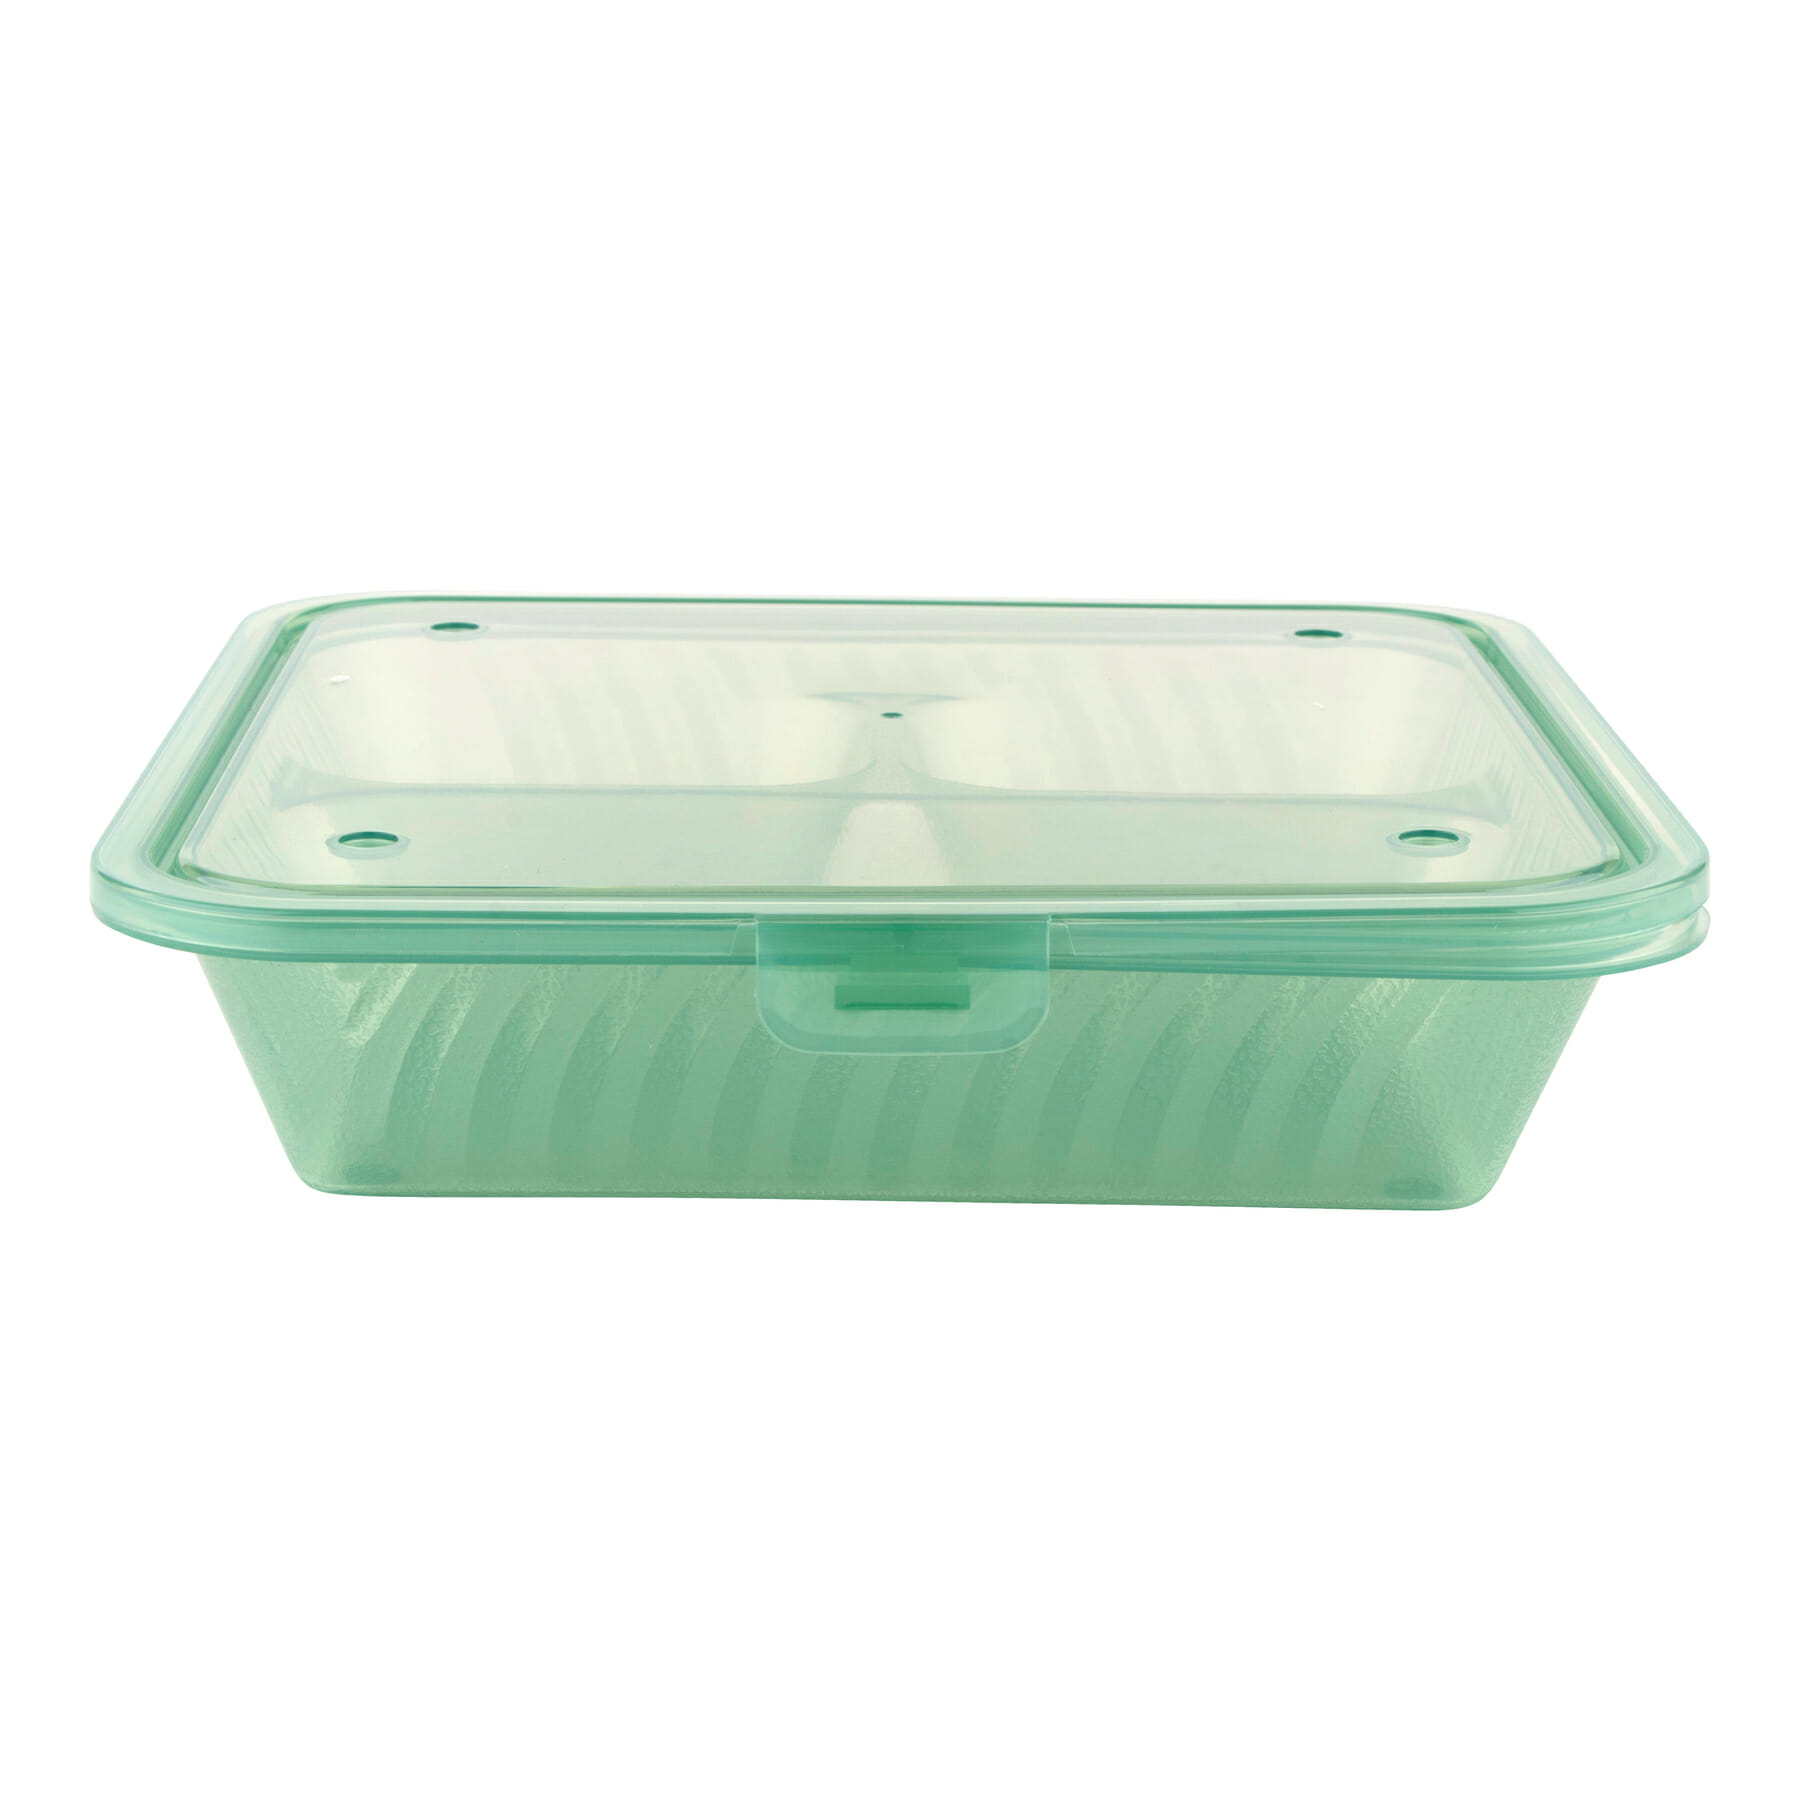 Empress Earth 9 Carryout Food Containers - Case of 150